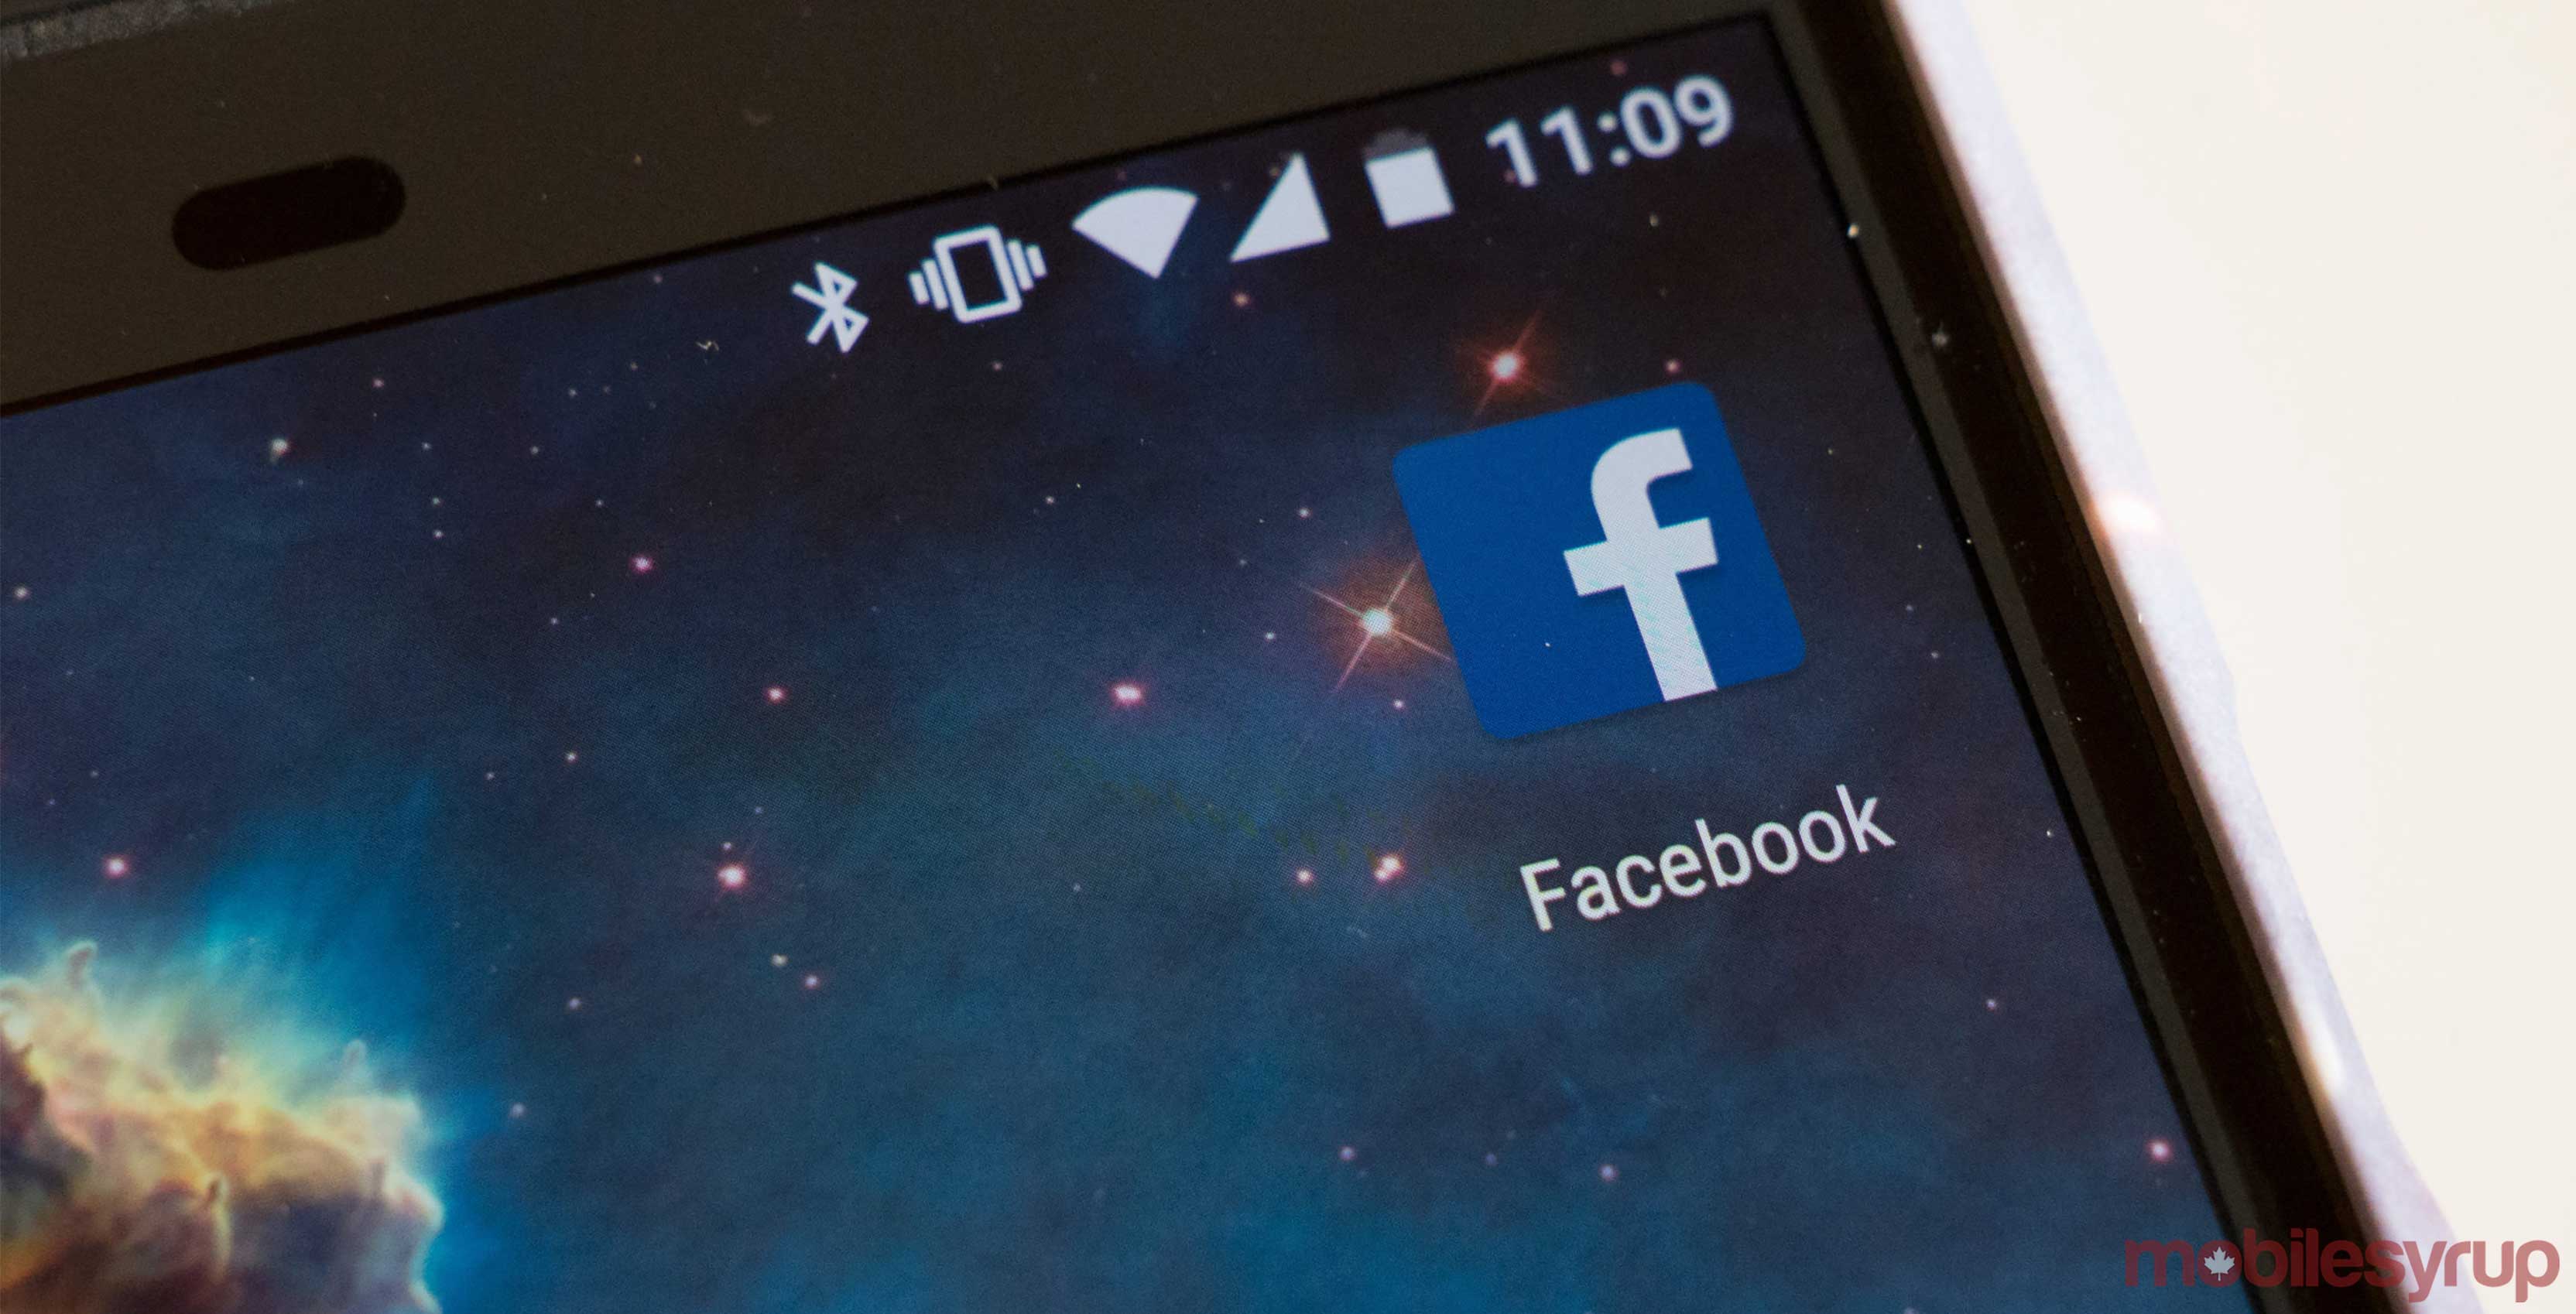 Facebook app on Android